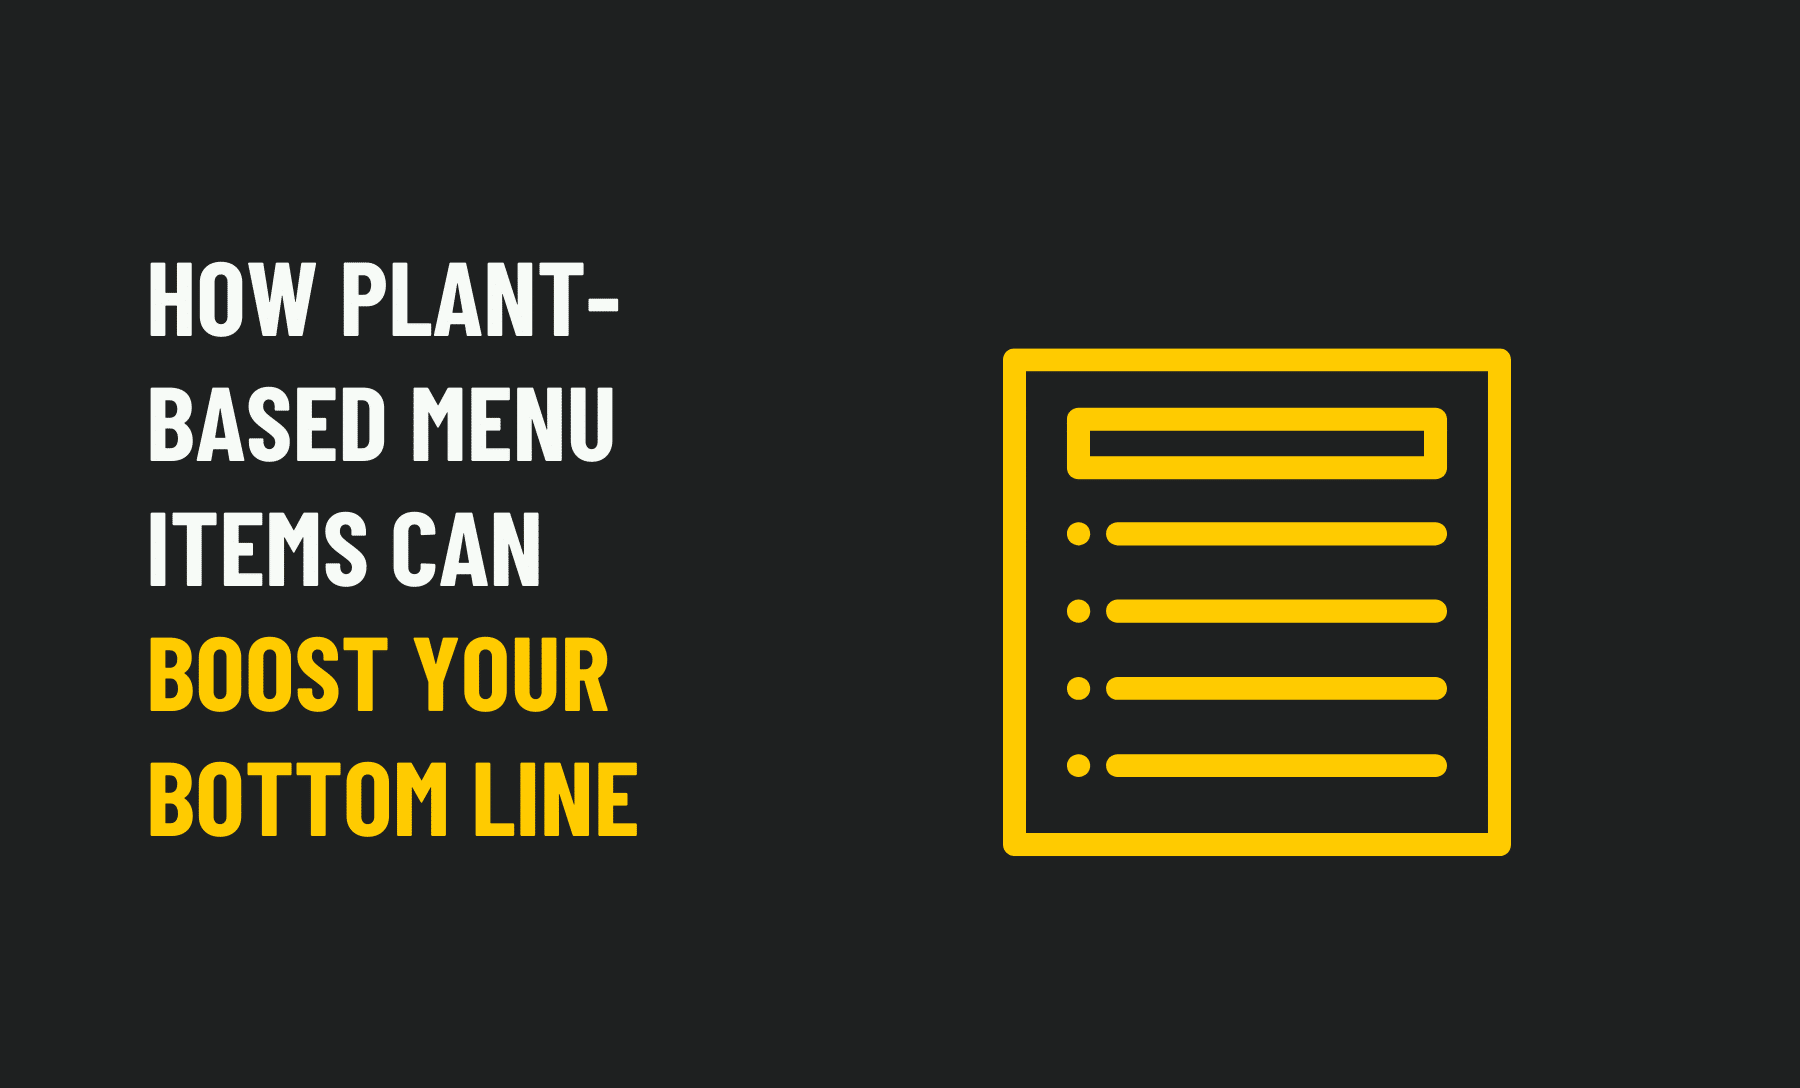 How Plant-Based Menu Items Can Boost Your Bottom Line